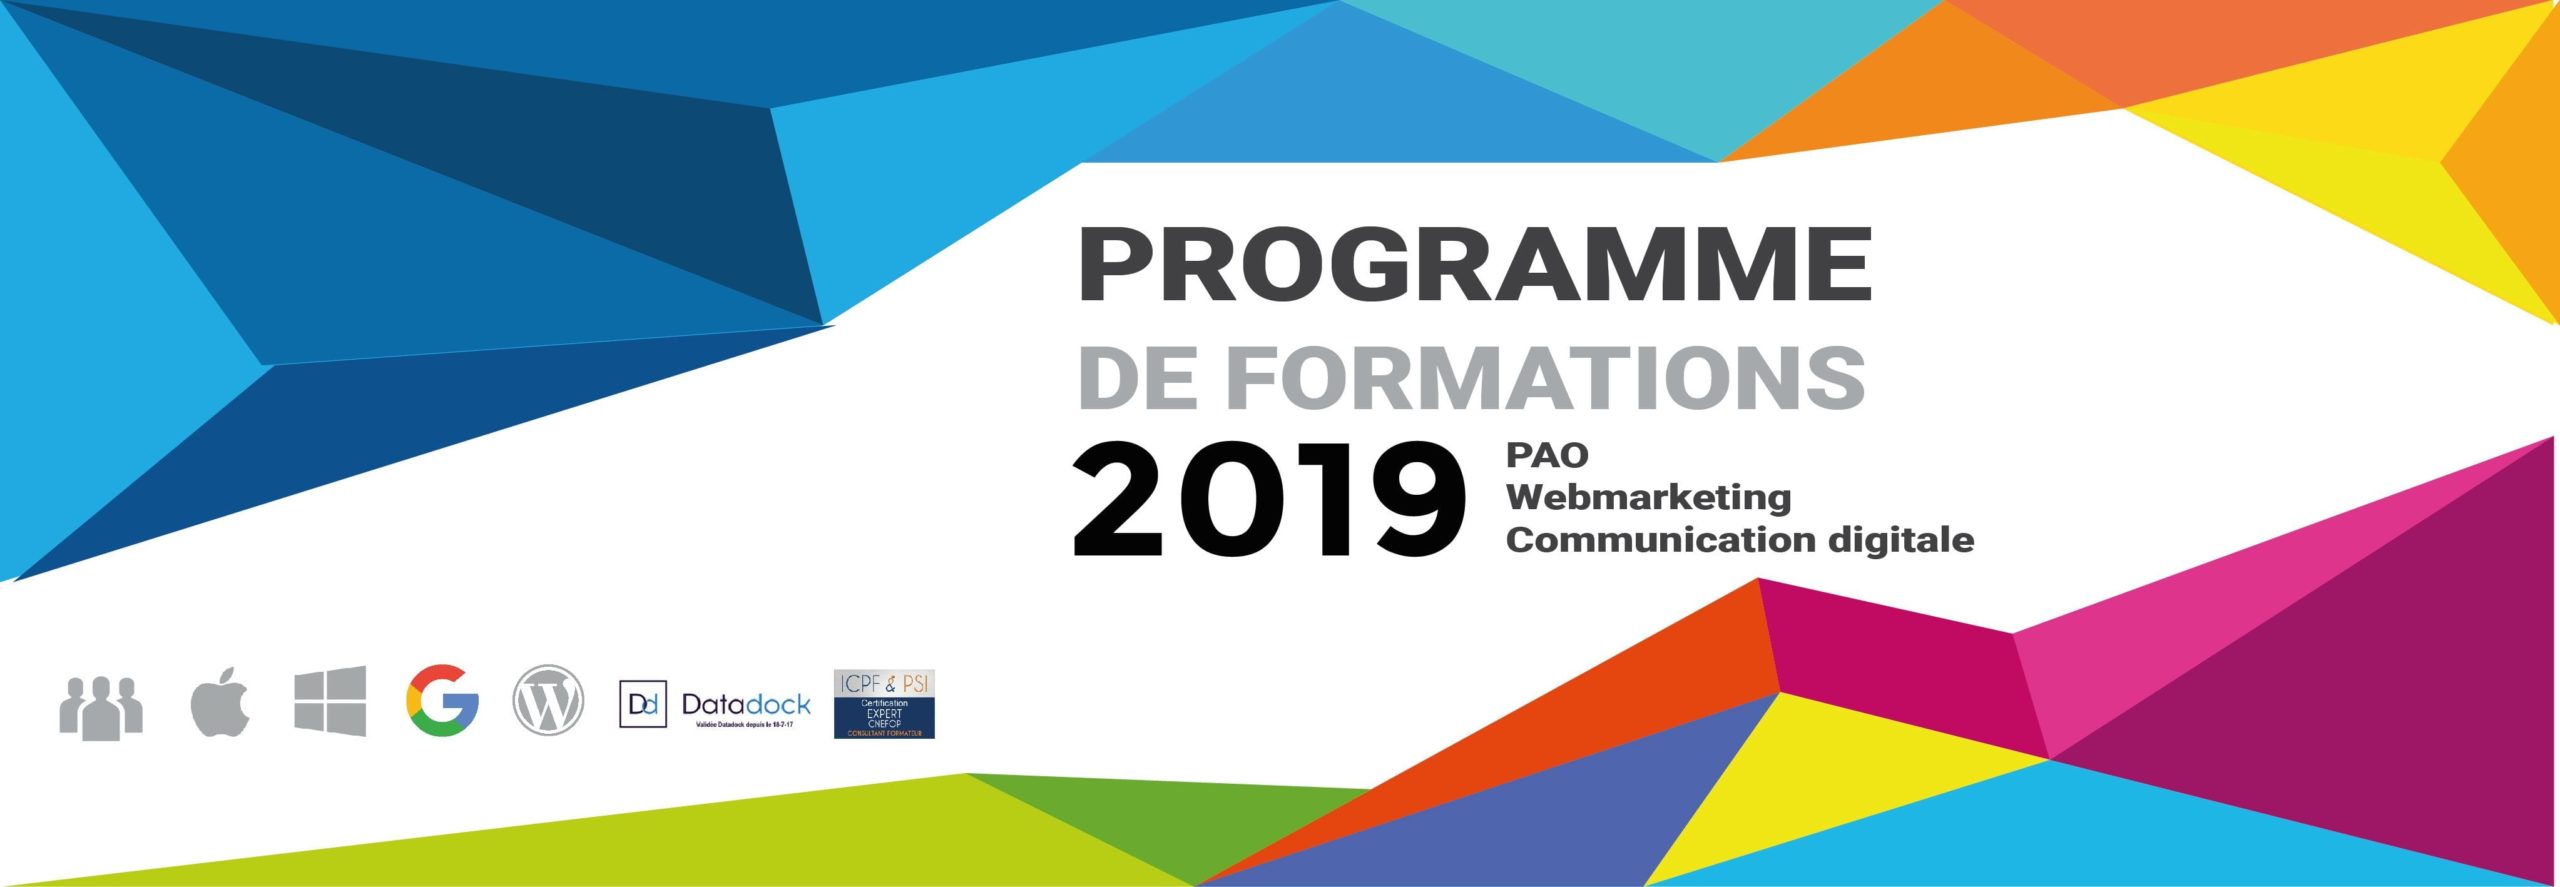 Programme-Formations-2019-Verdi-Formations